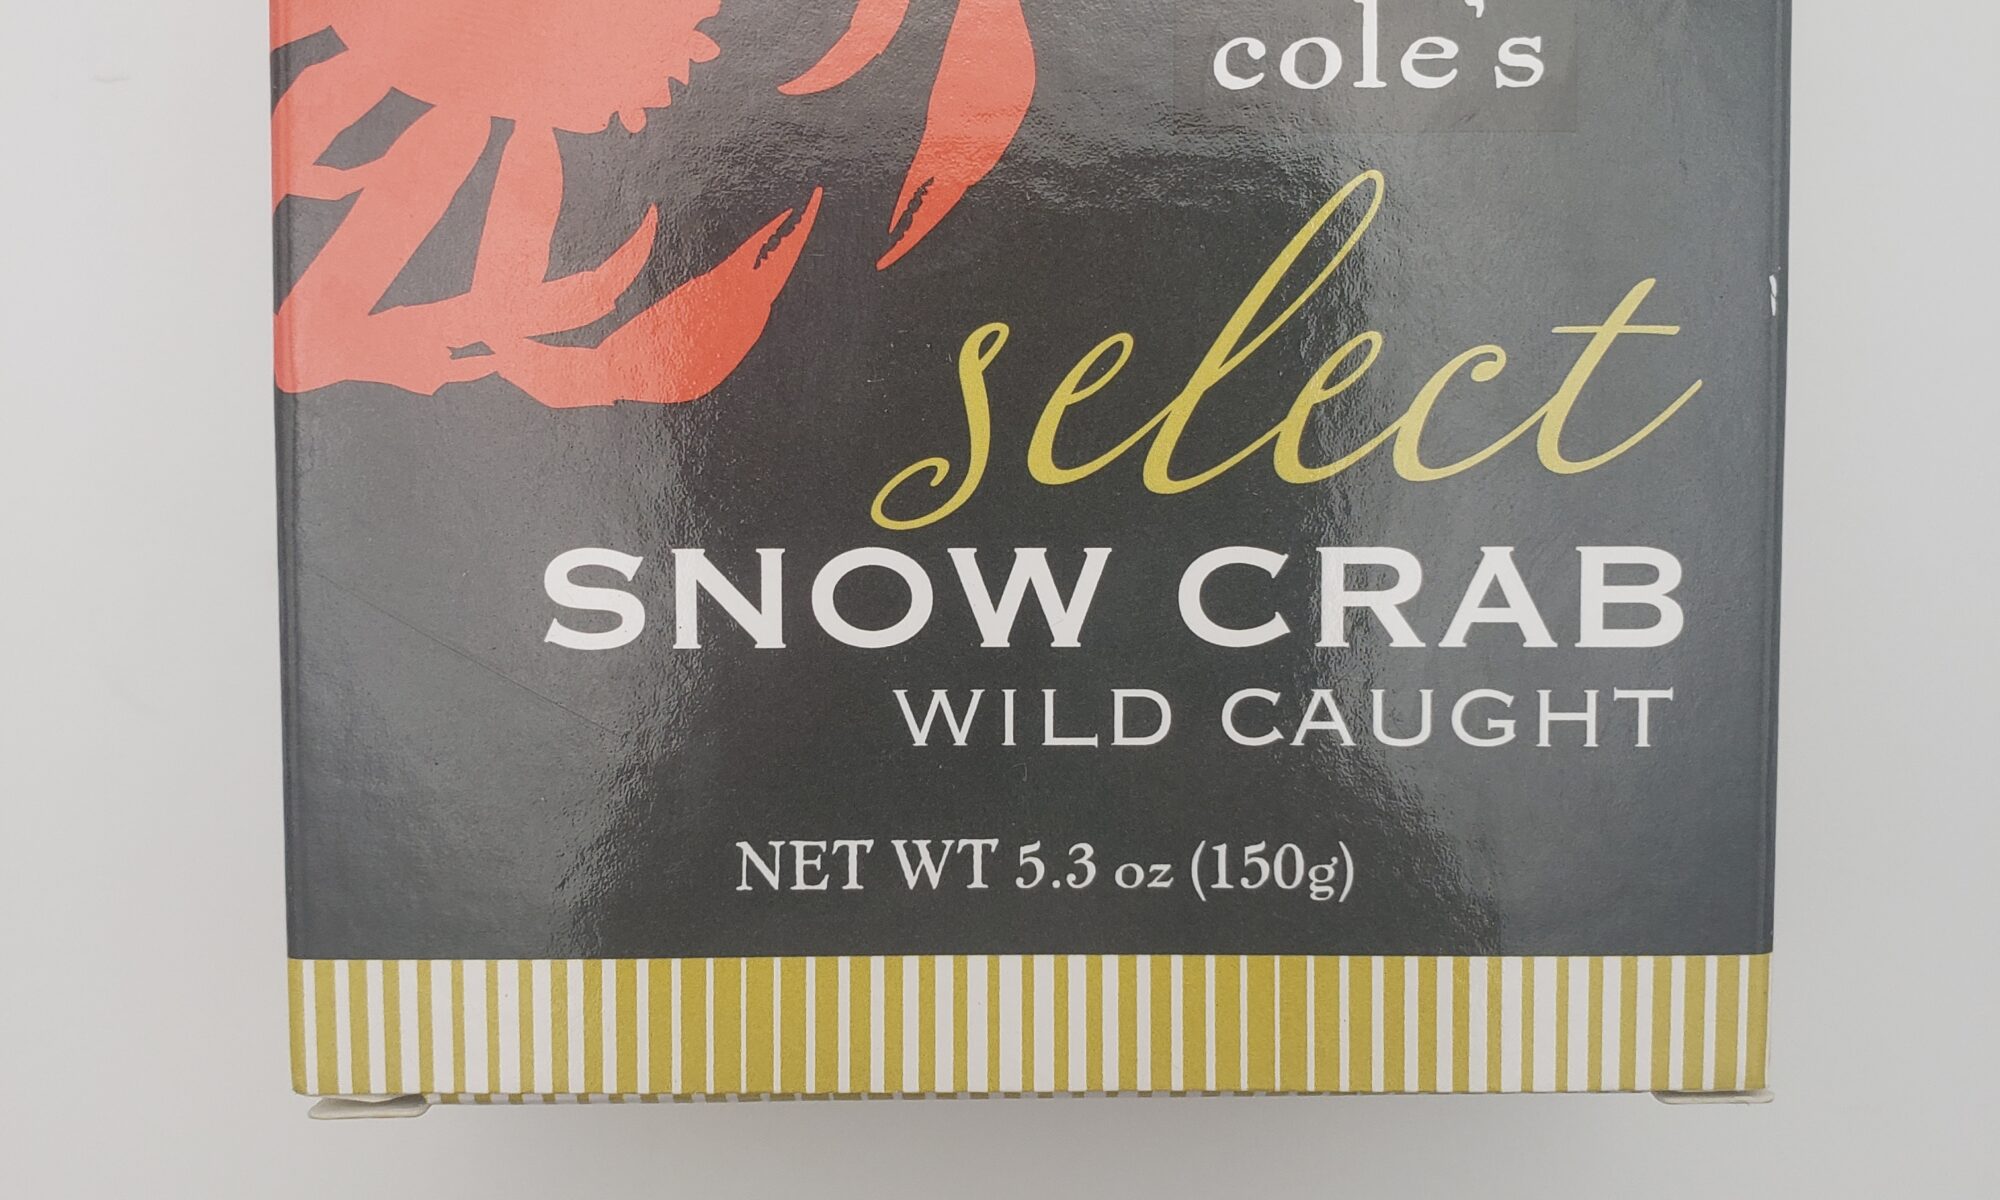 Image of Coles Select Snow Crab